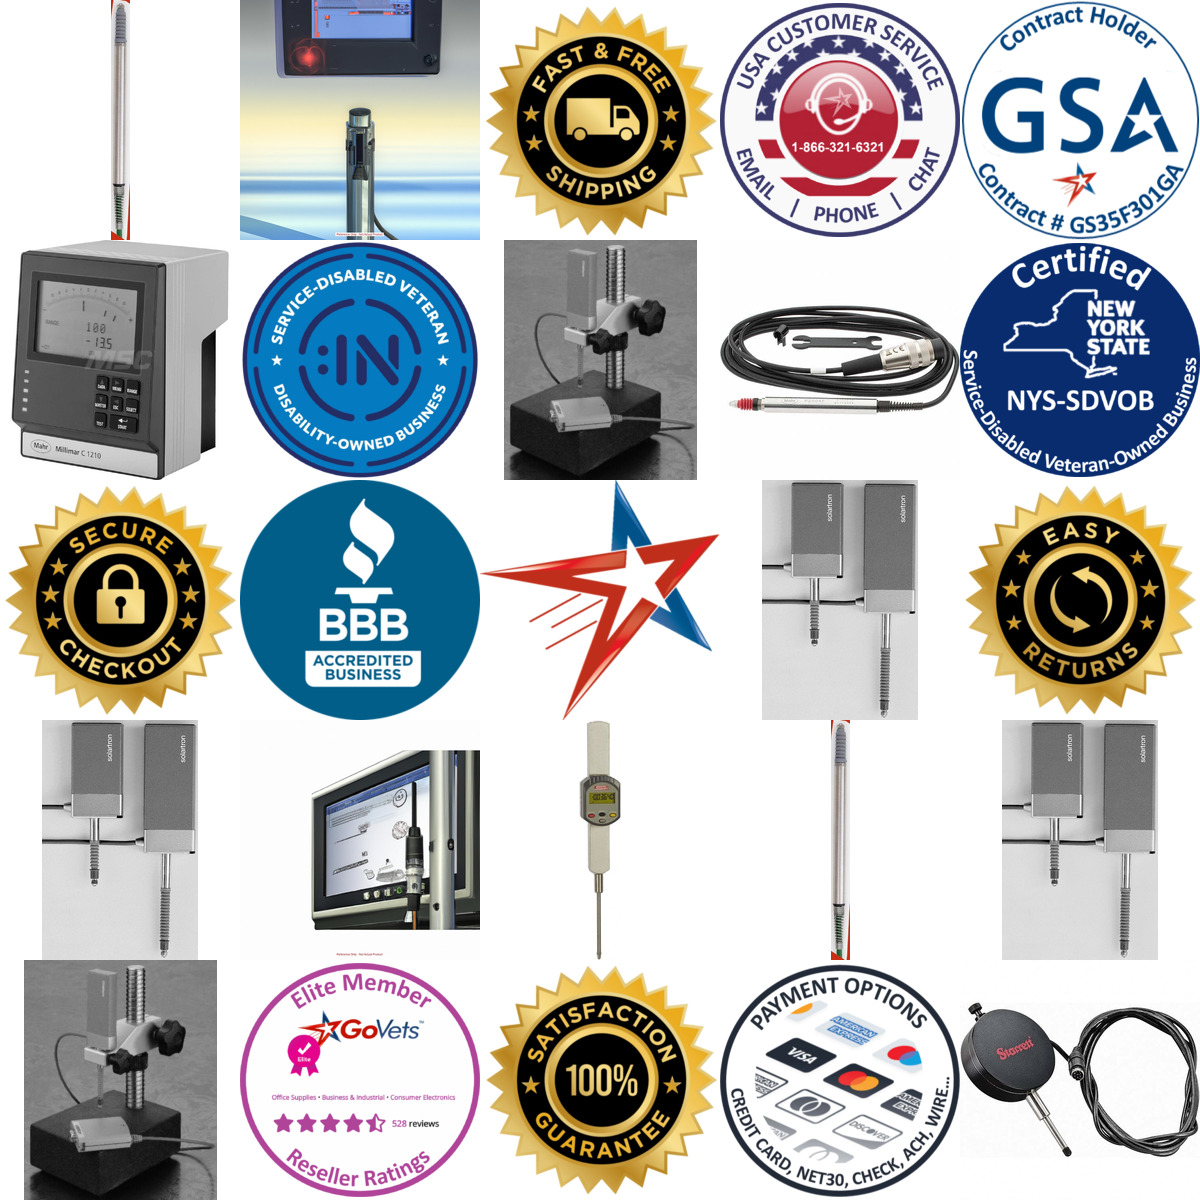 A selection of Remote Display Digital Probes products on GoVets